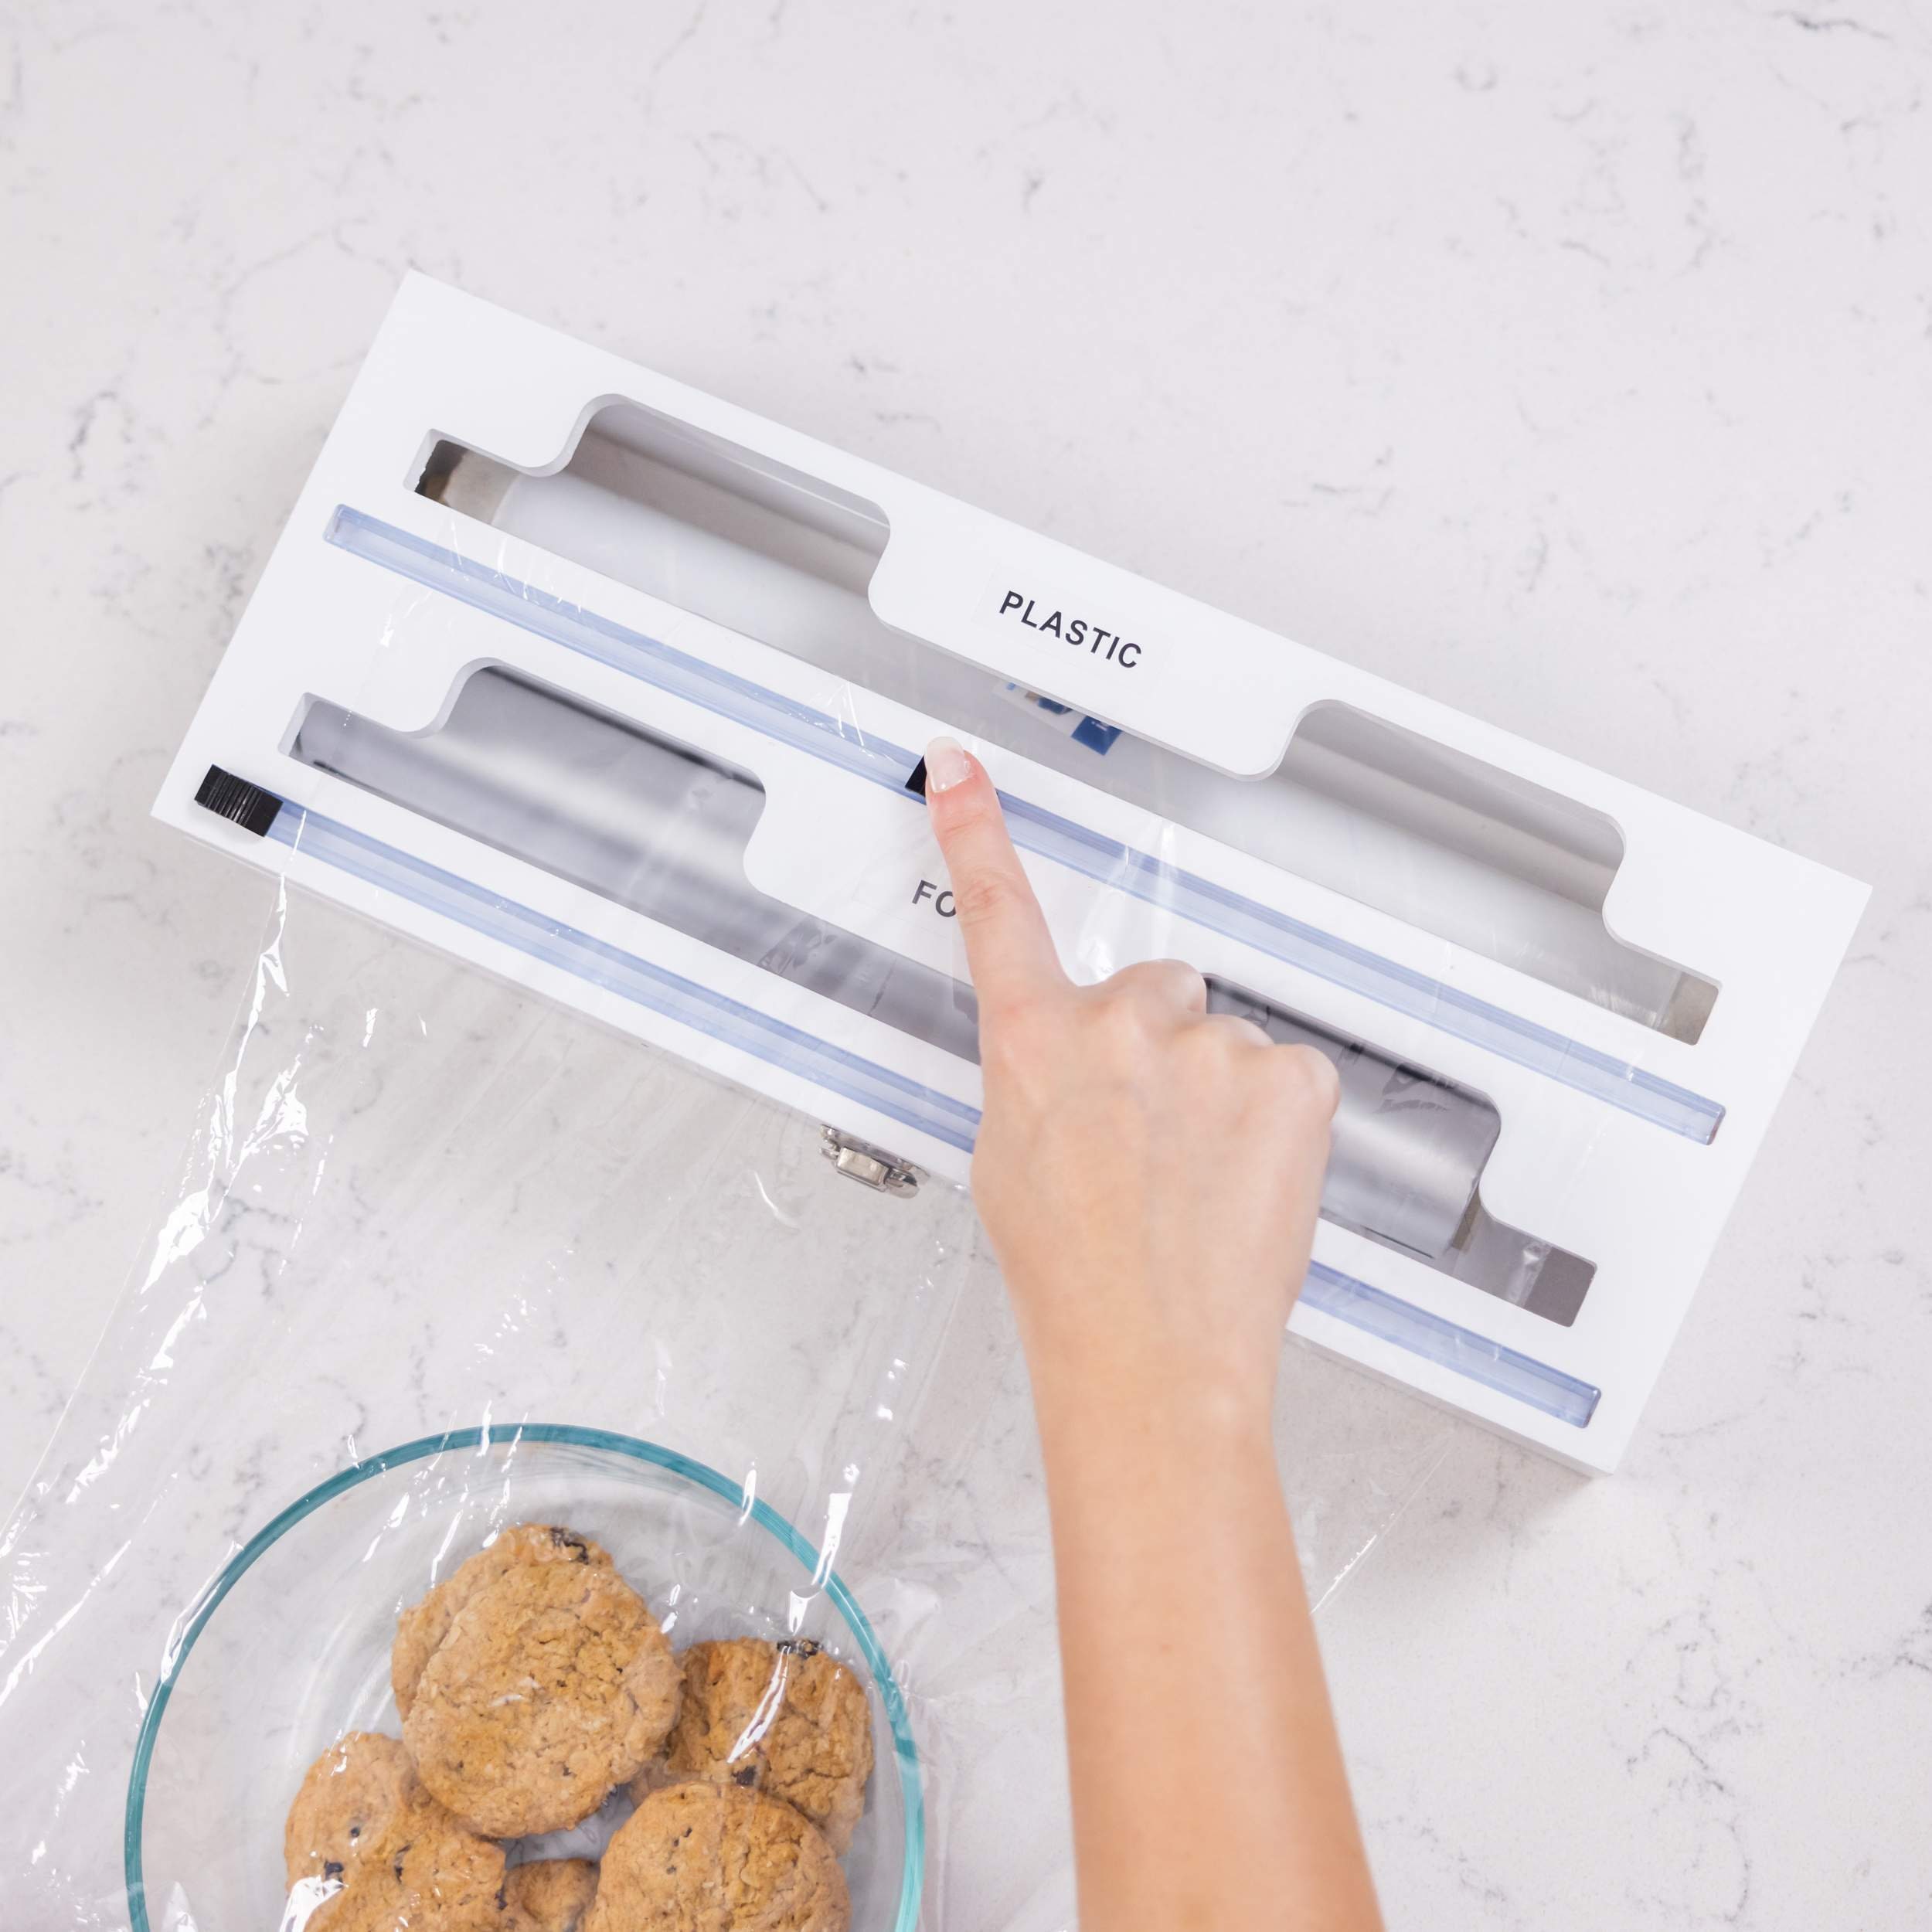 Dropship Cling Wrap Dispenser With Slide Cutter Aluminum Foil, Baking  Parchment Paper Organizer Kitchen Tool to Sell Online at a Lower Price